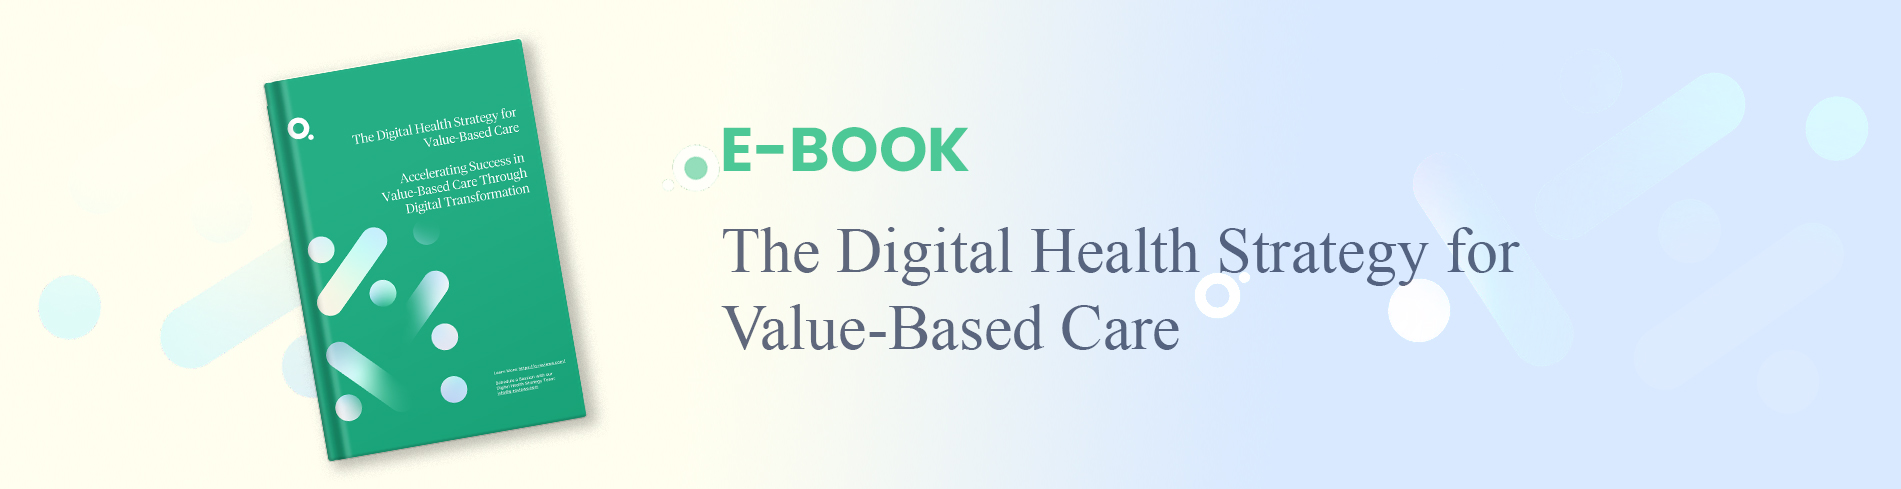 Digital Health Strategy for Value-Based Care